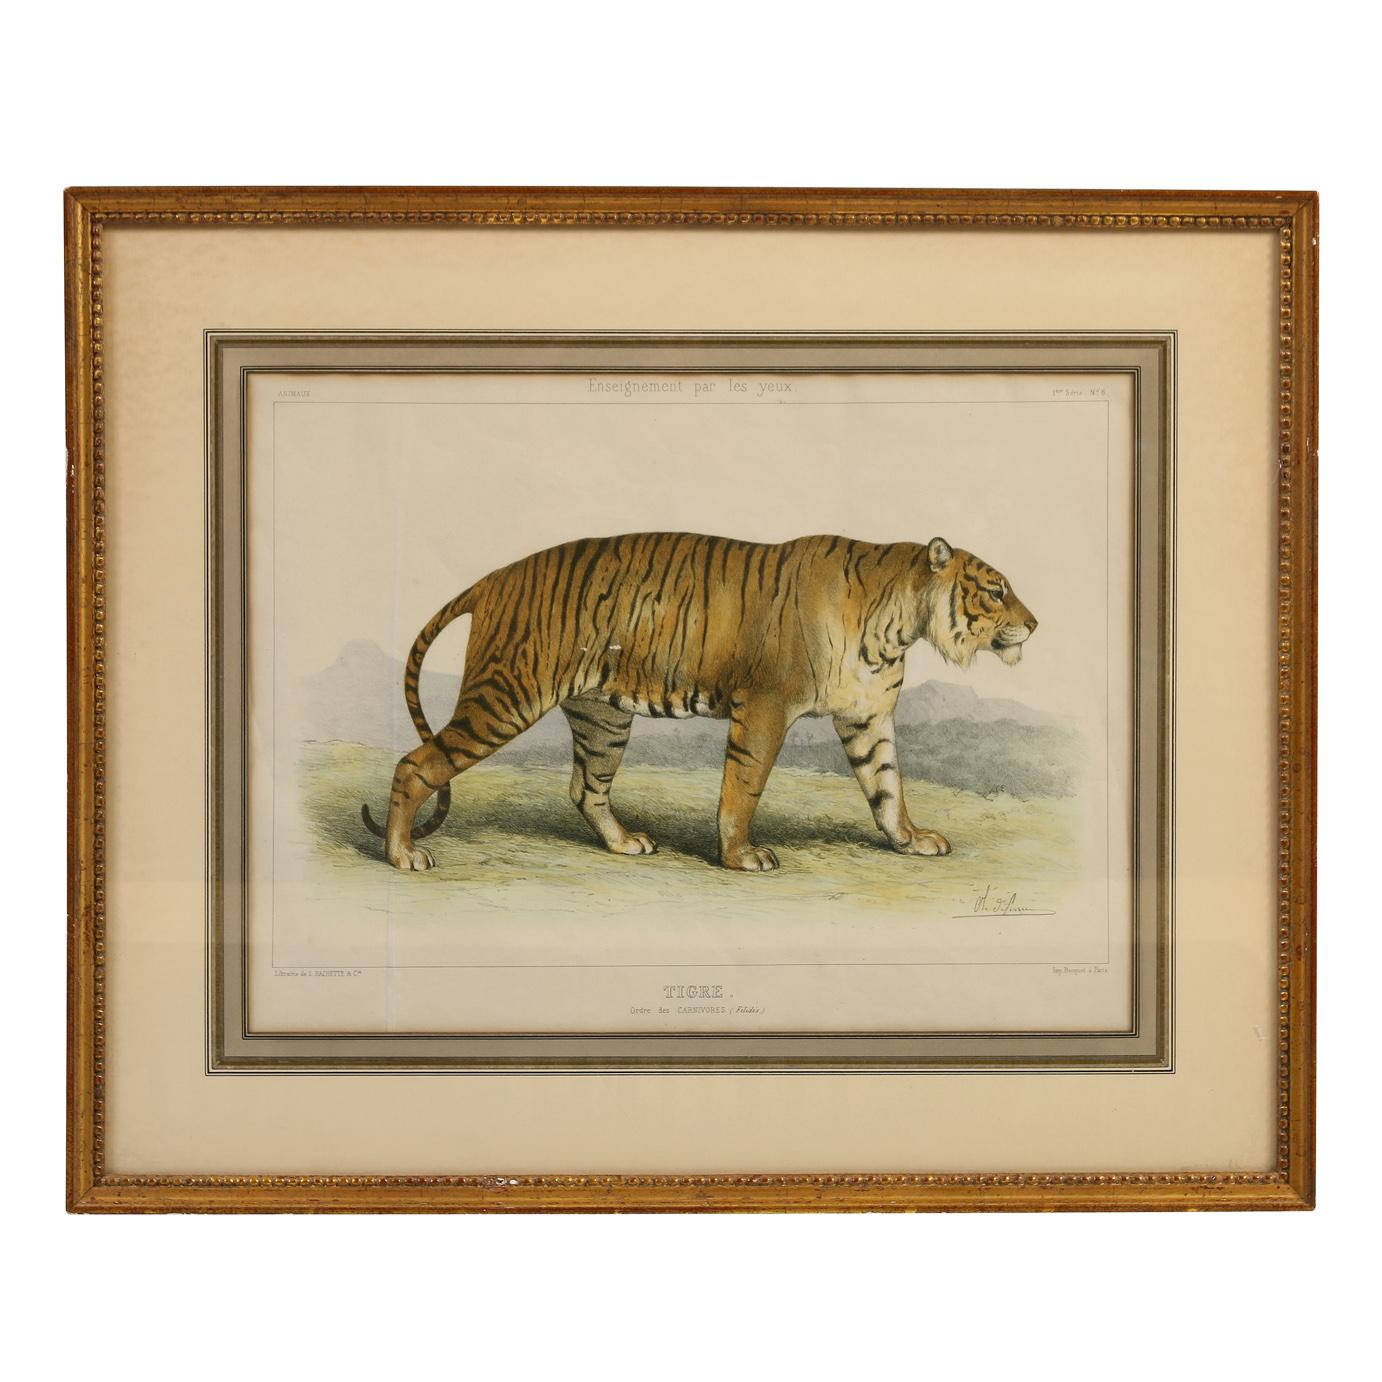 A set of four hand colored etchings of African animals matted in gilt frames with bead detail. One features a rhinoceros, one features a tiger, one a lion and one an ostrich.